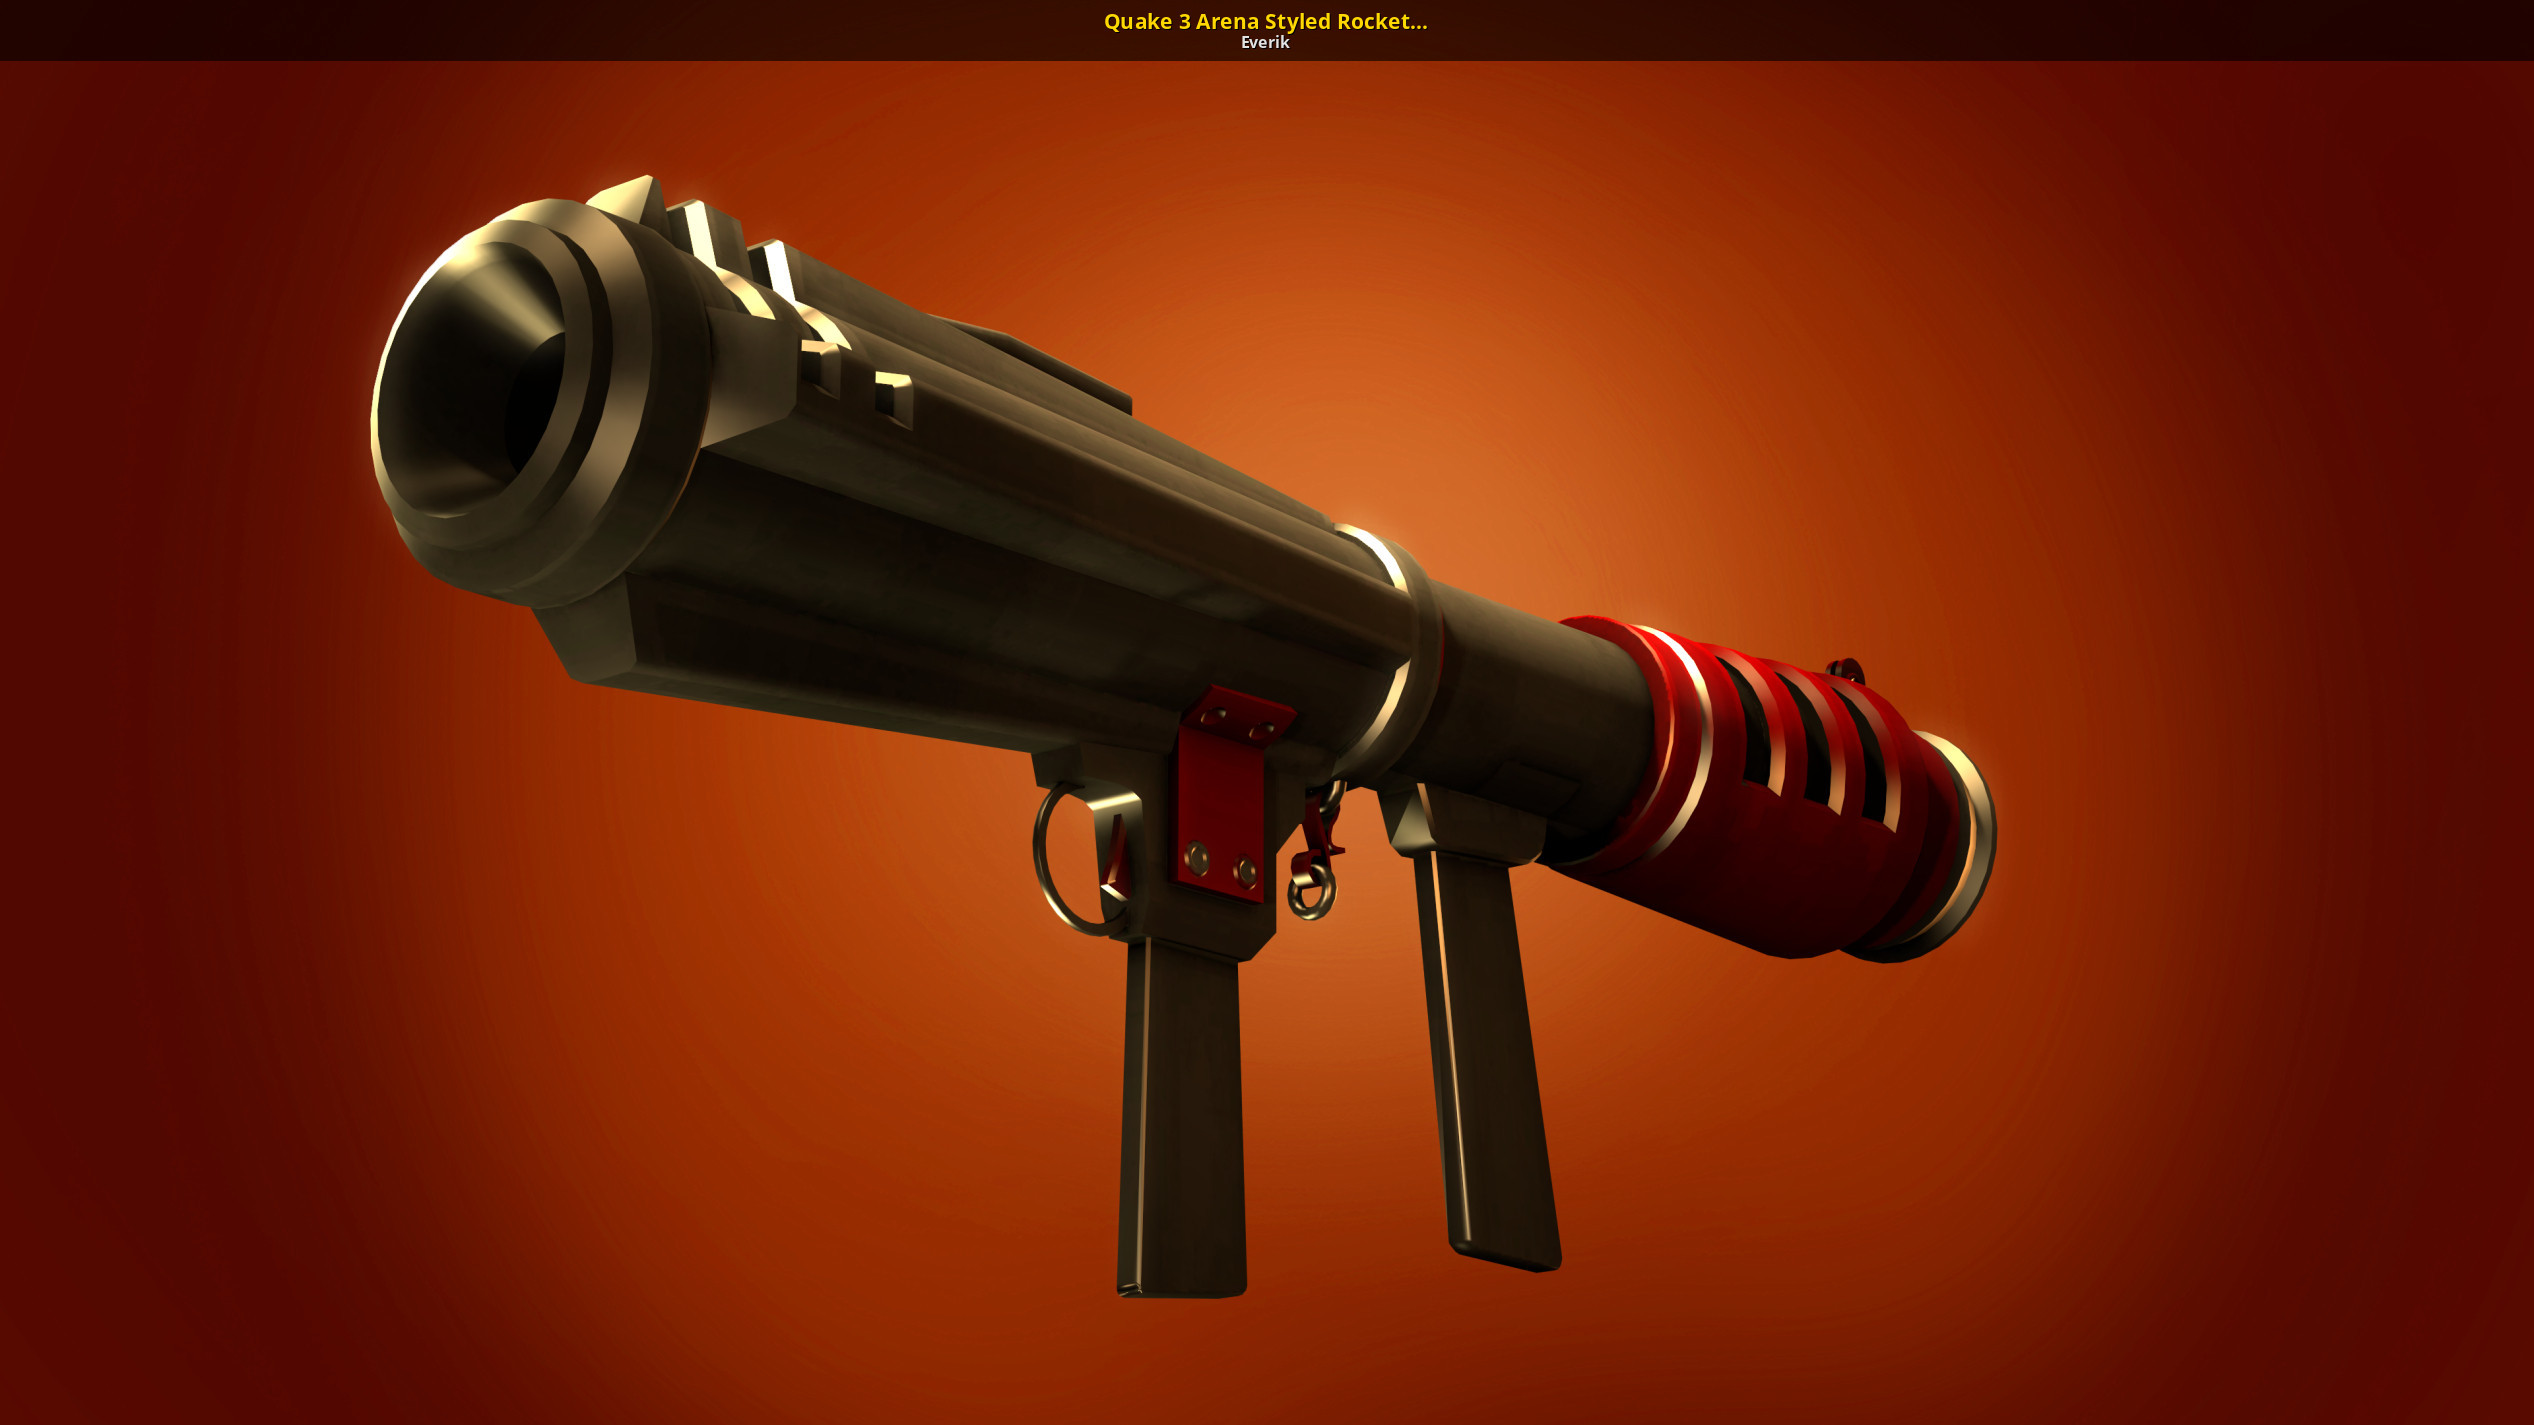 Quake 3 Arena Styled Rocket Launcher. 